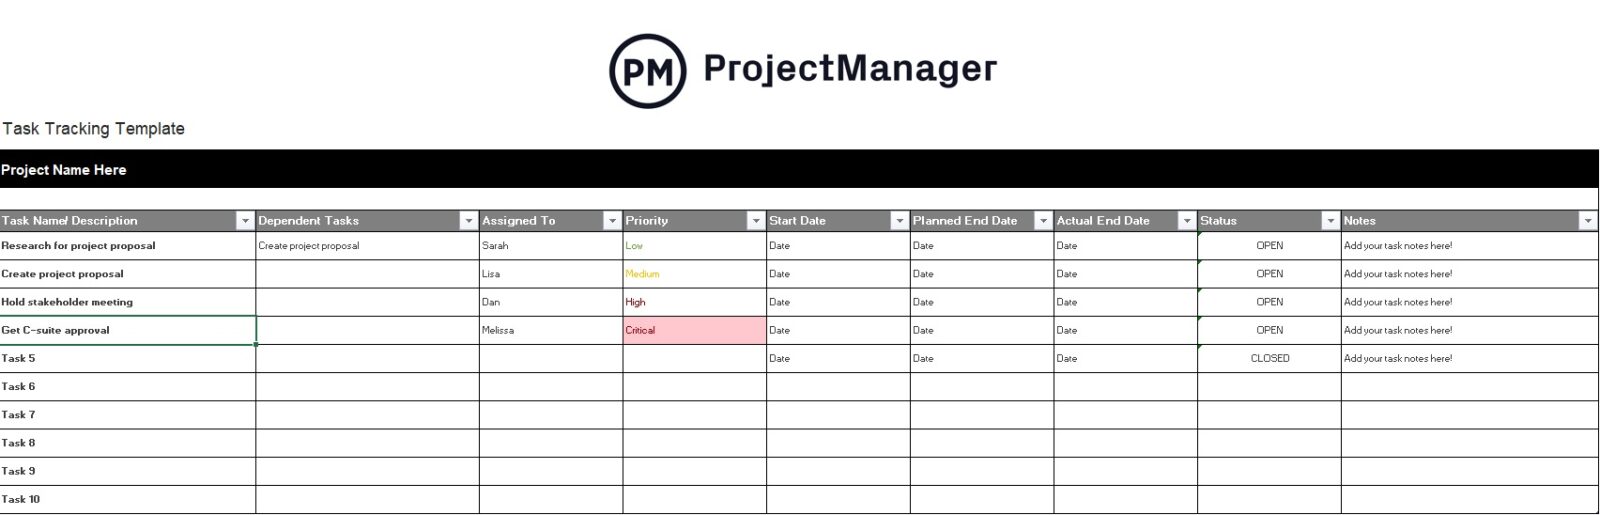 image of ProjectManager's Task Tracking Template